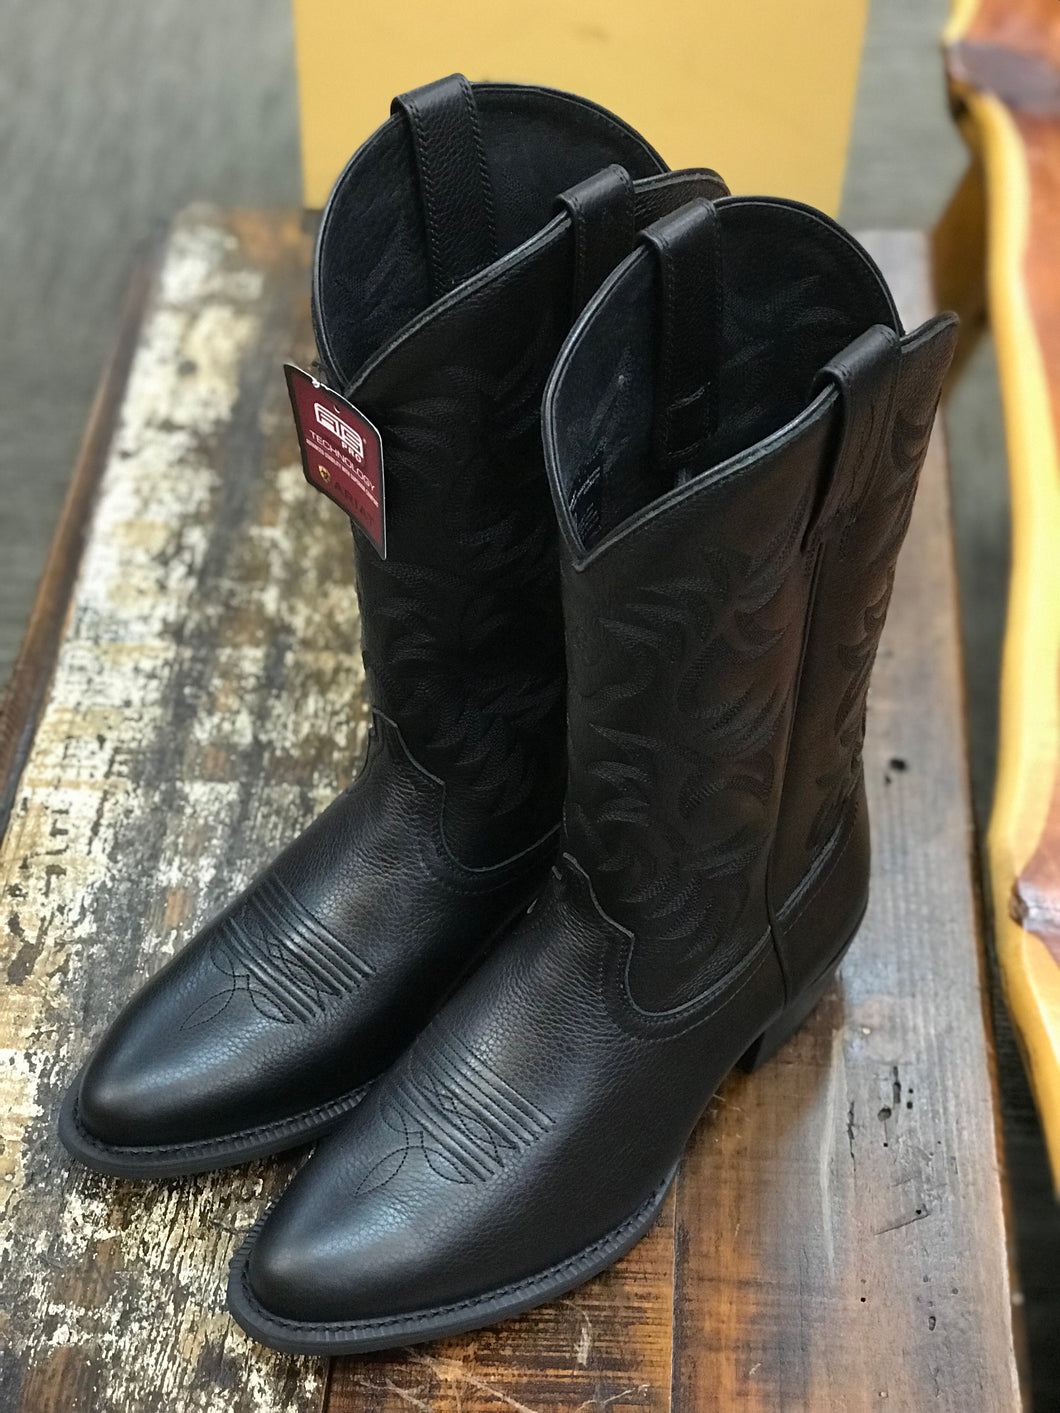 Ariat Heritage Western R Toe Boot